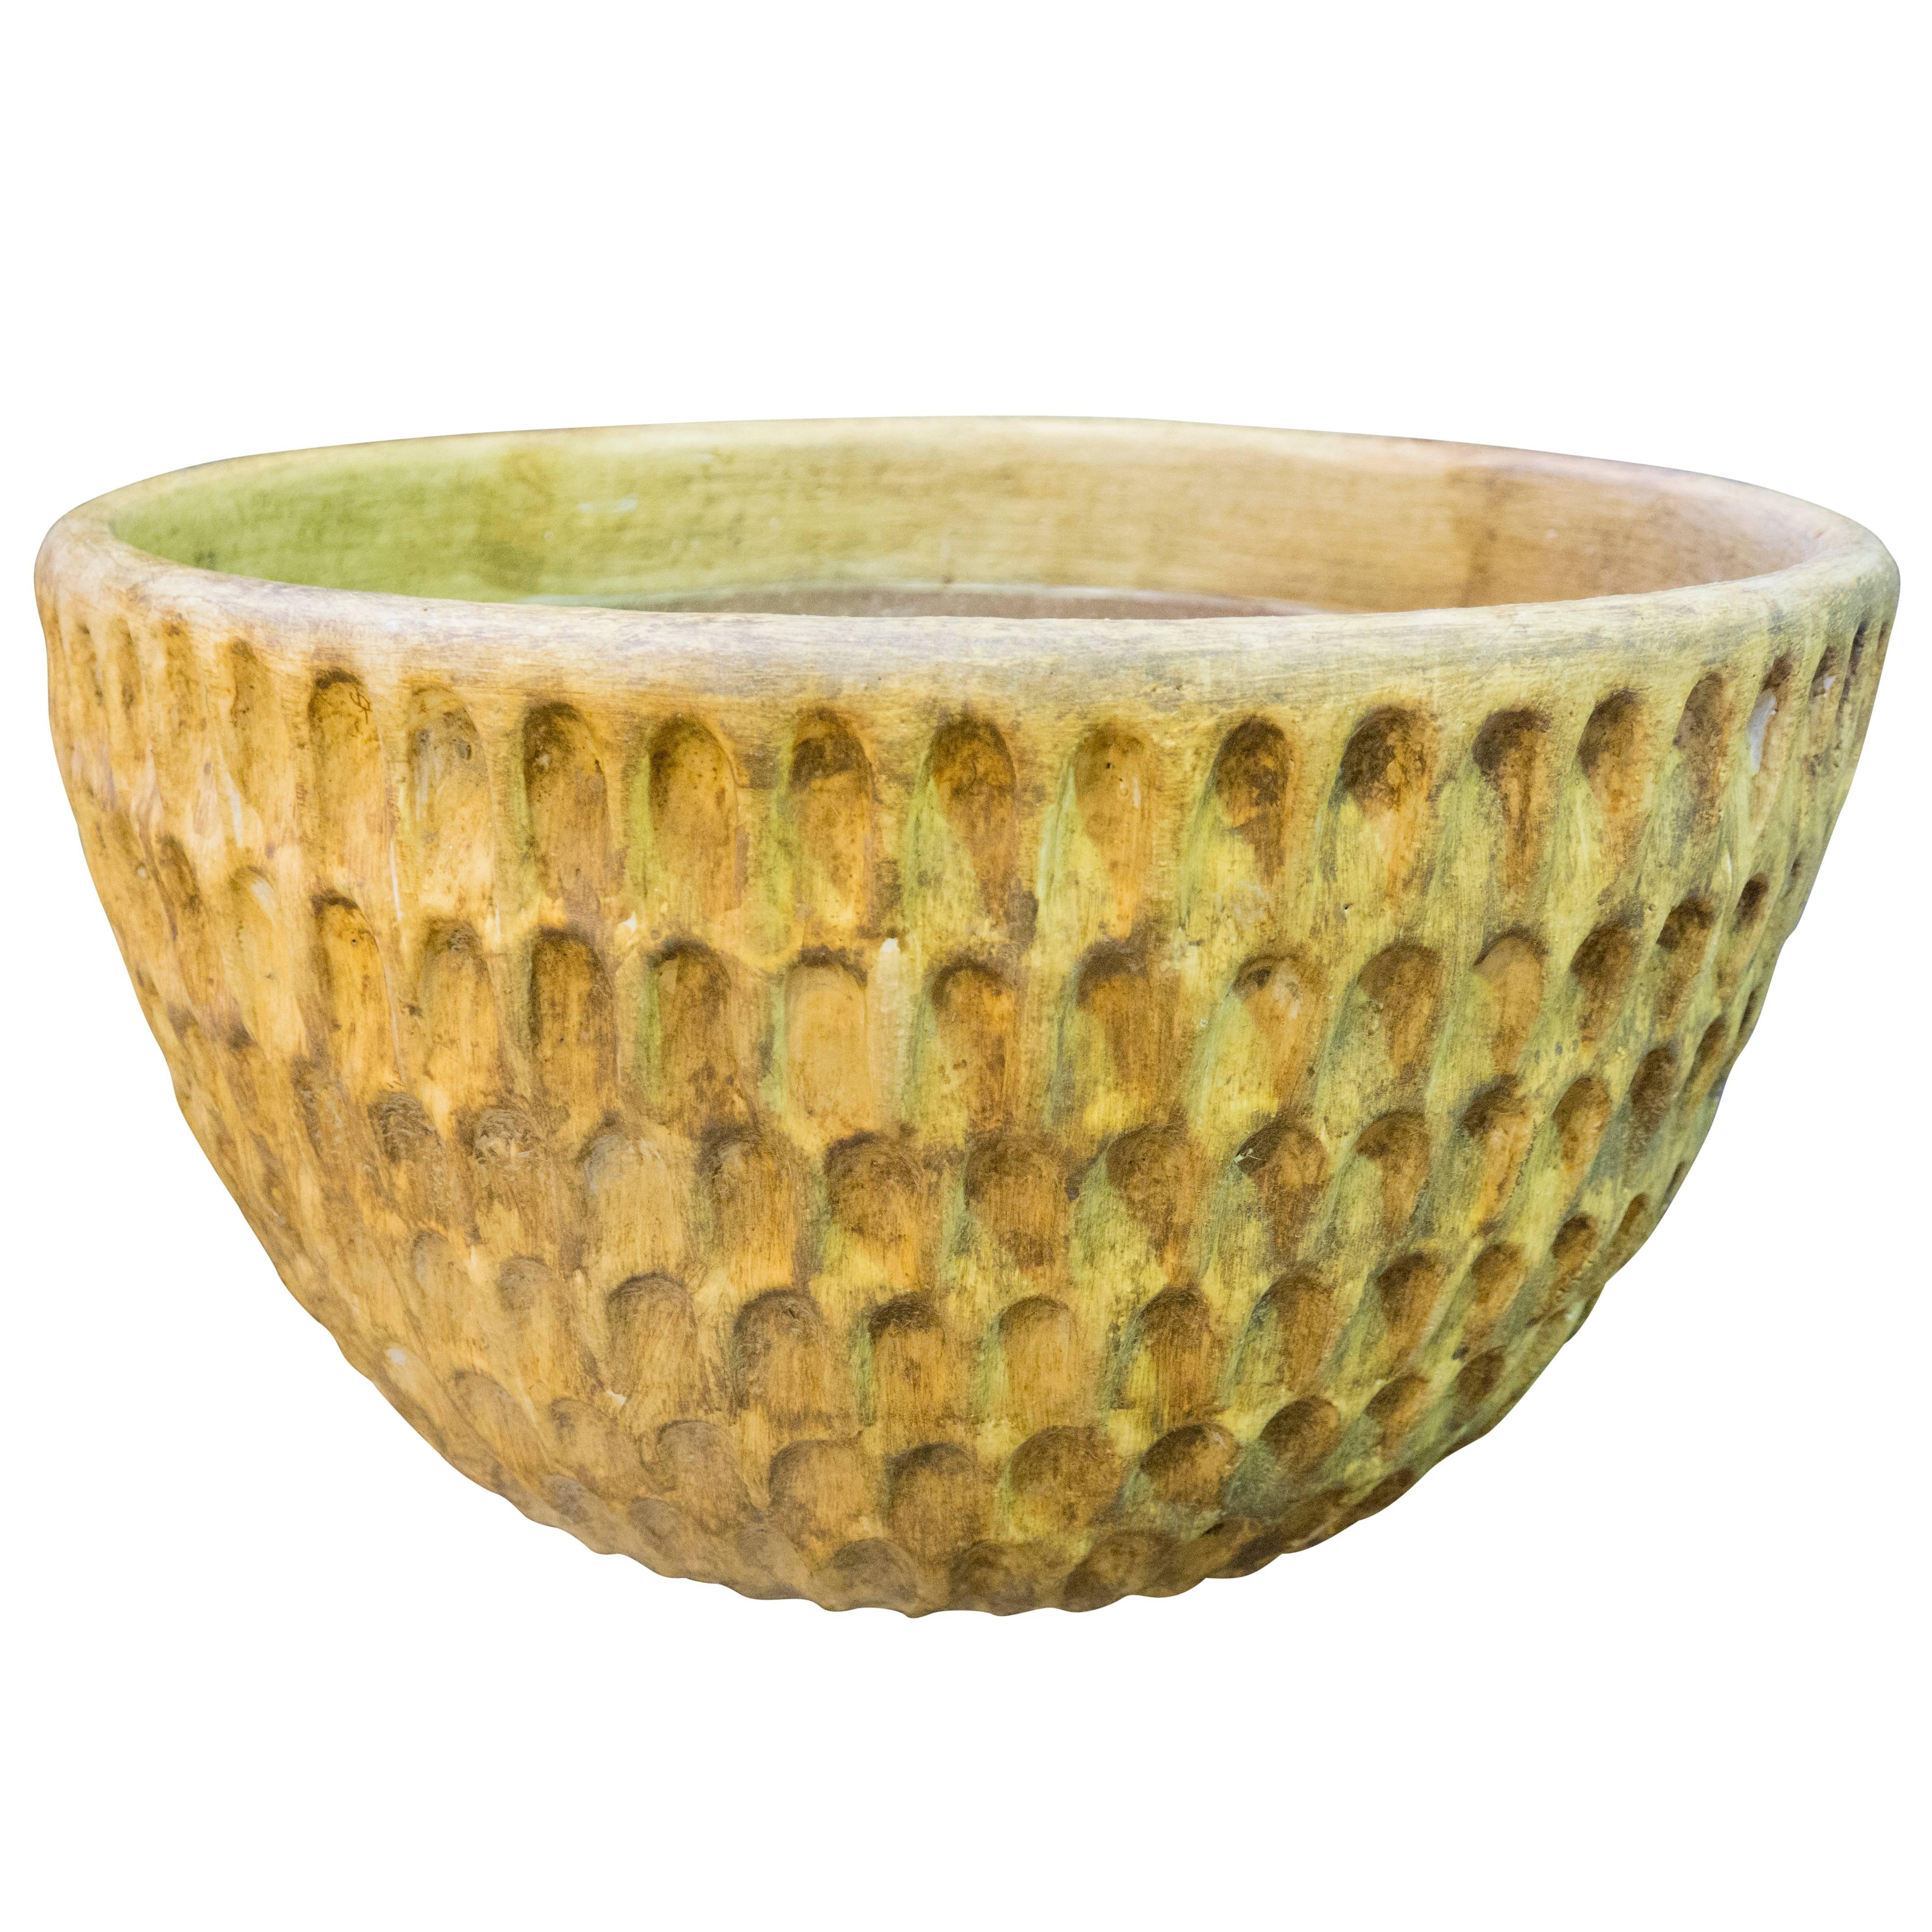 The thumb pot is from a collaboration of Hans Stumpf and Stan BItters and is known for its thumb sized dimples and thick heavy aesthetic. This molded planter was created circa 1980 and has a ochre finish. This is a lovely piece of American garden